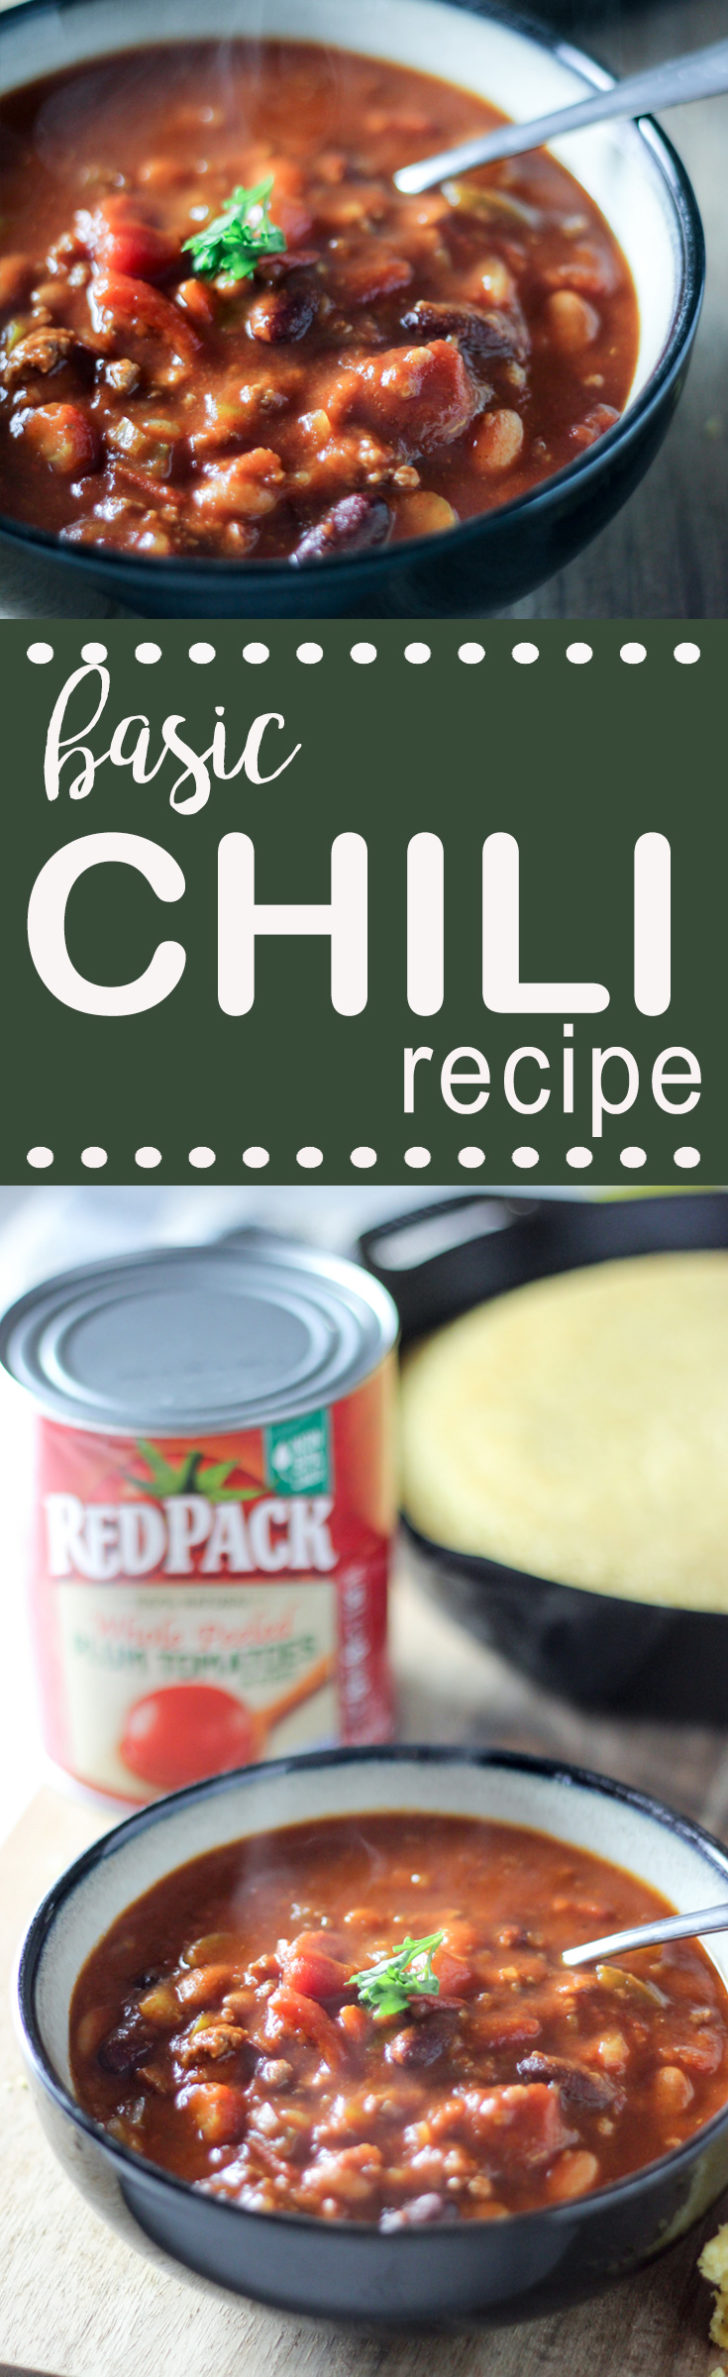 bowls of chili, corn bread and can of Red Pack Tomatoes